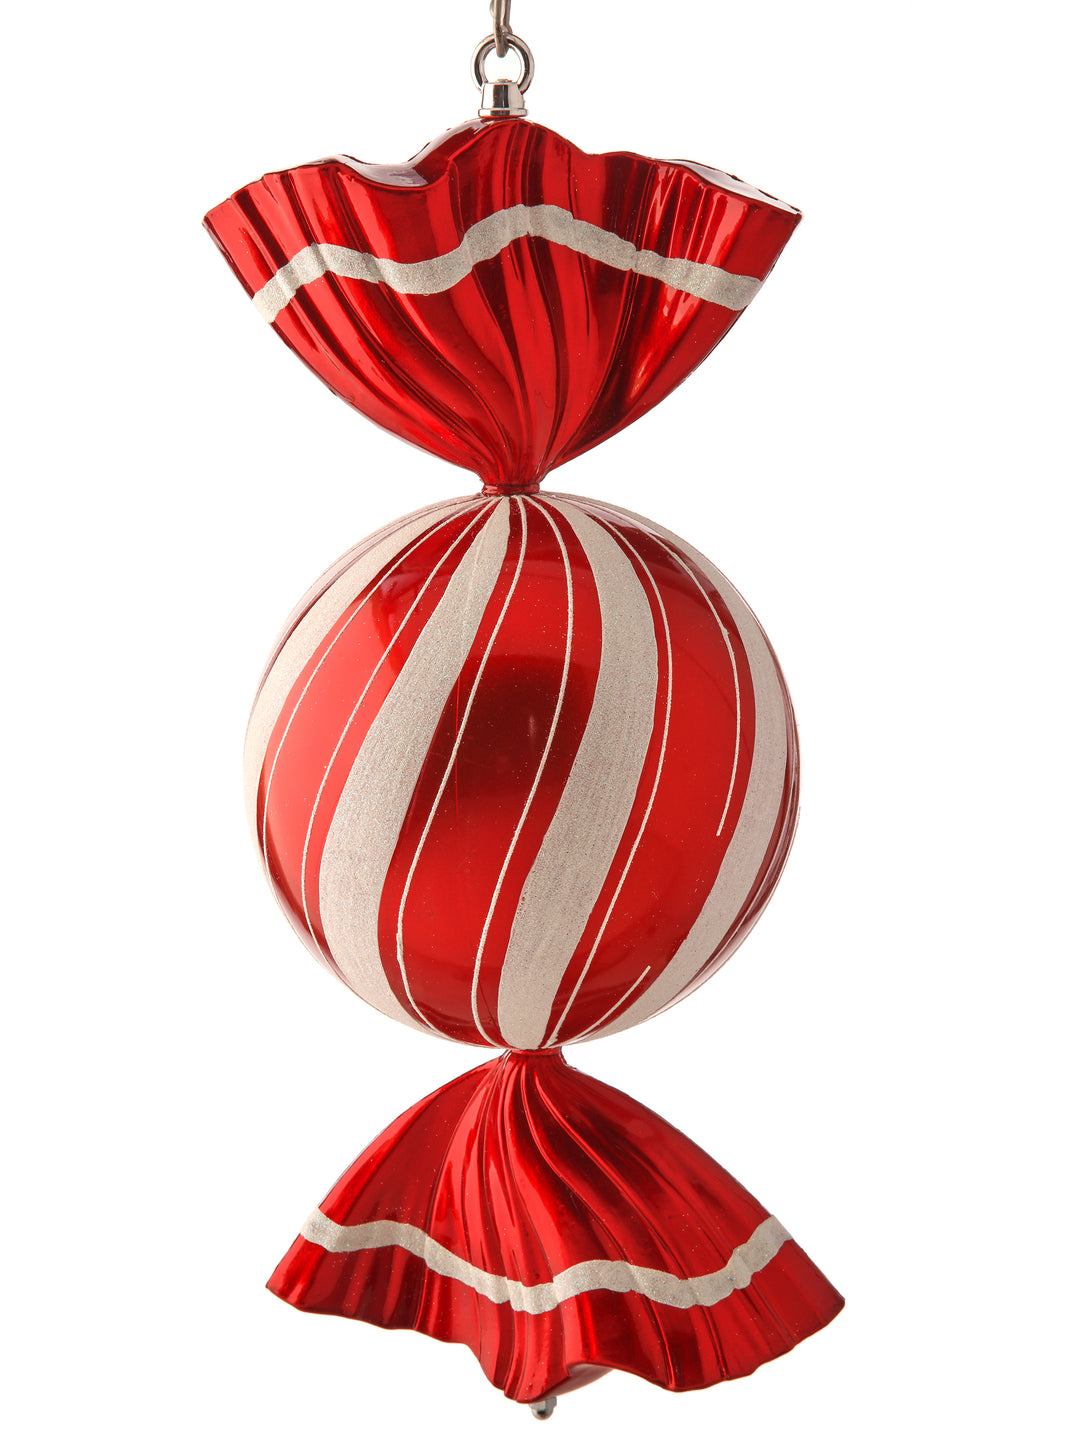 Regency 18.5" Peppermint Candy Round Twist Ornament/Attachment in Red/White